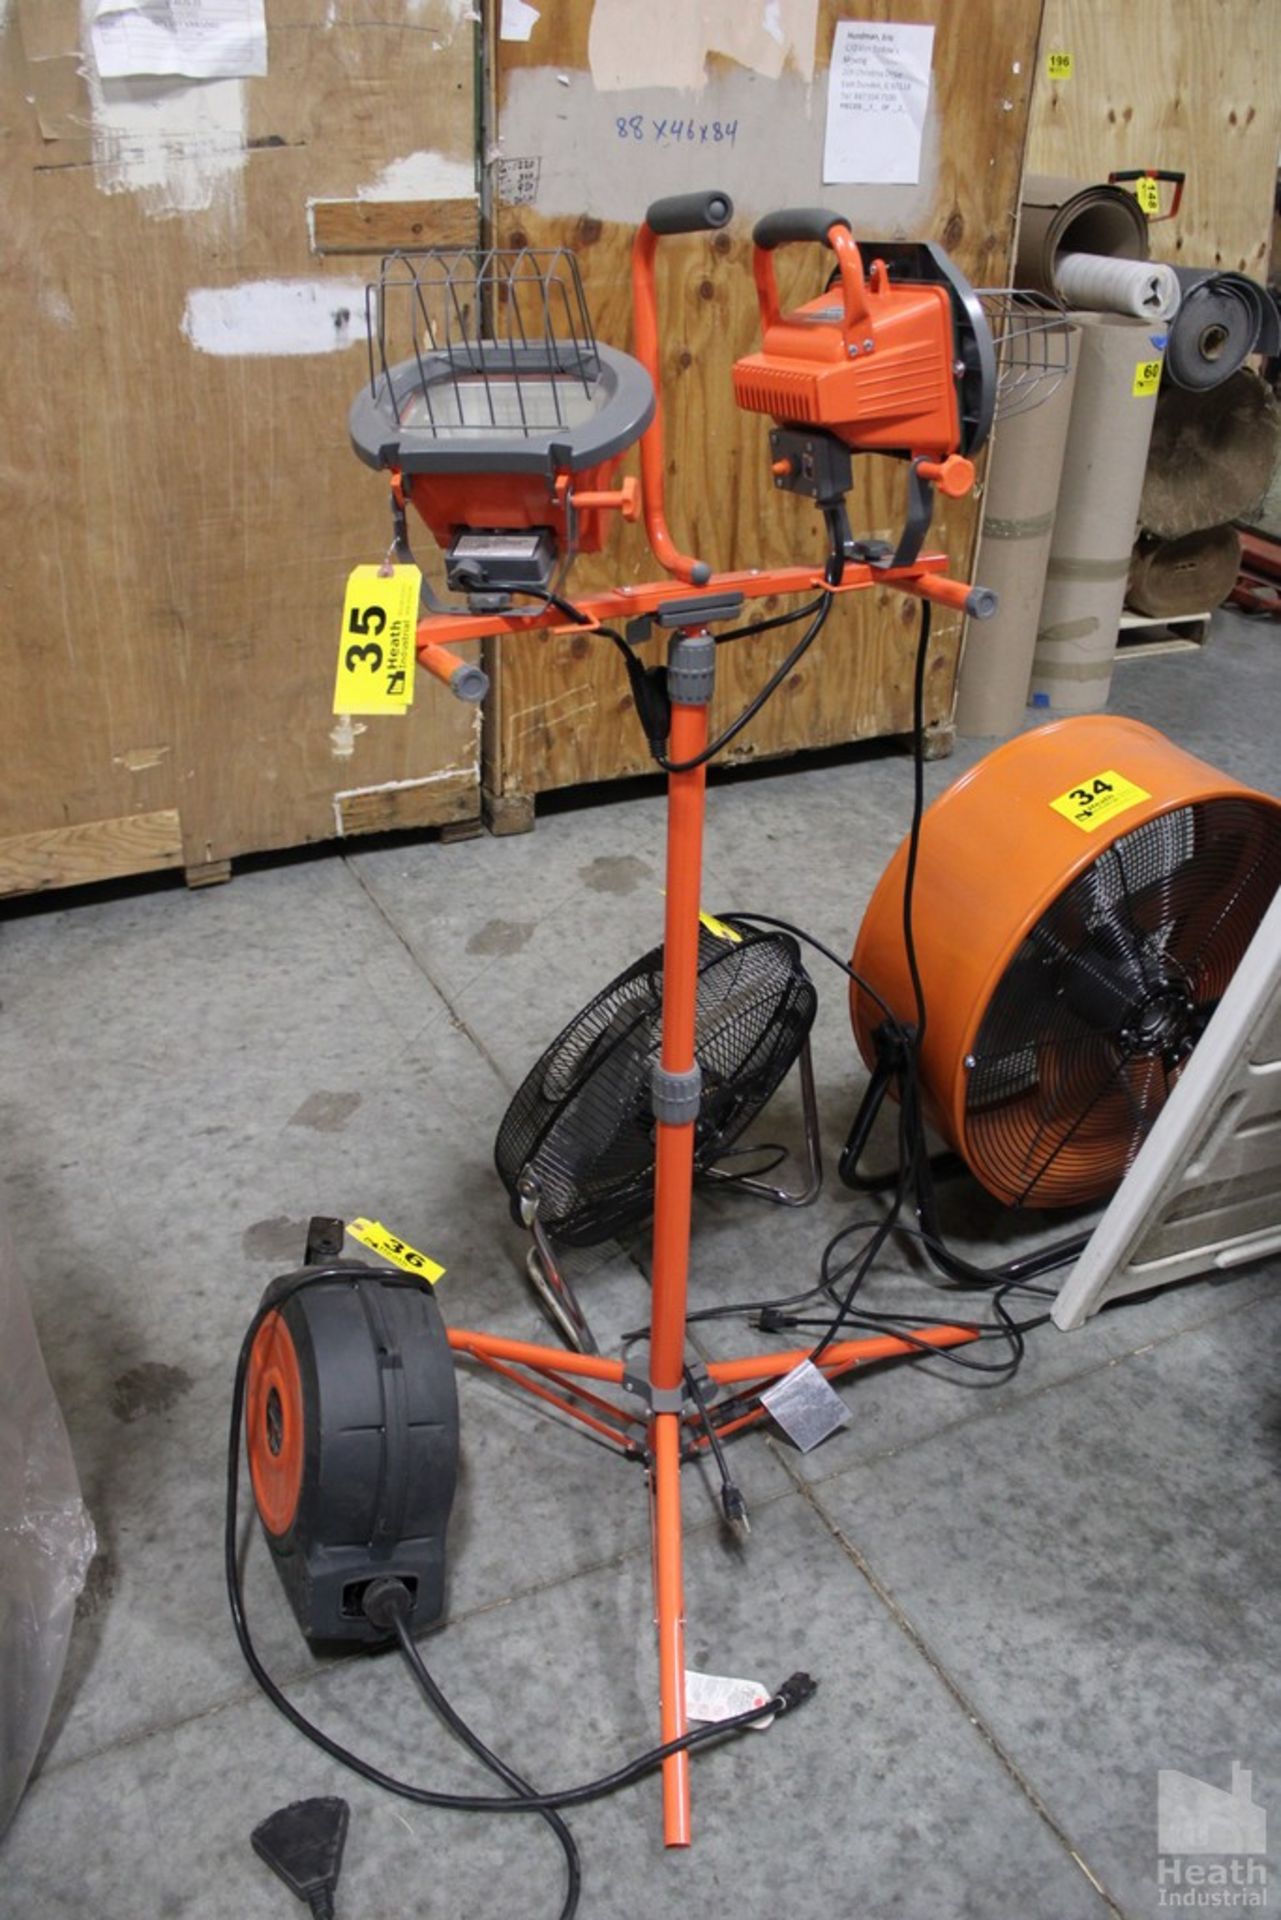 HDX WORKLIGHT STAND WITH TWO JOB SITE LIGHTS